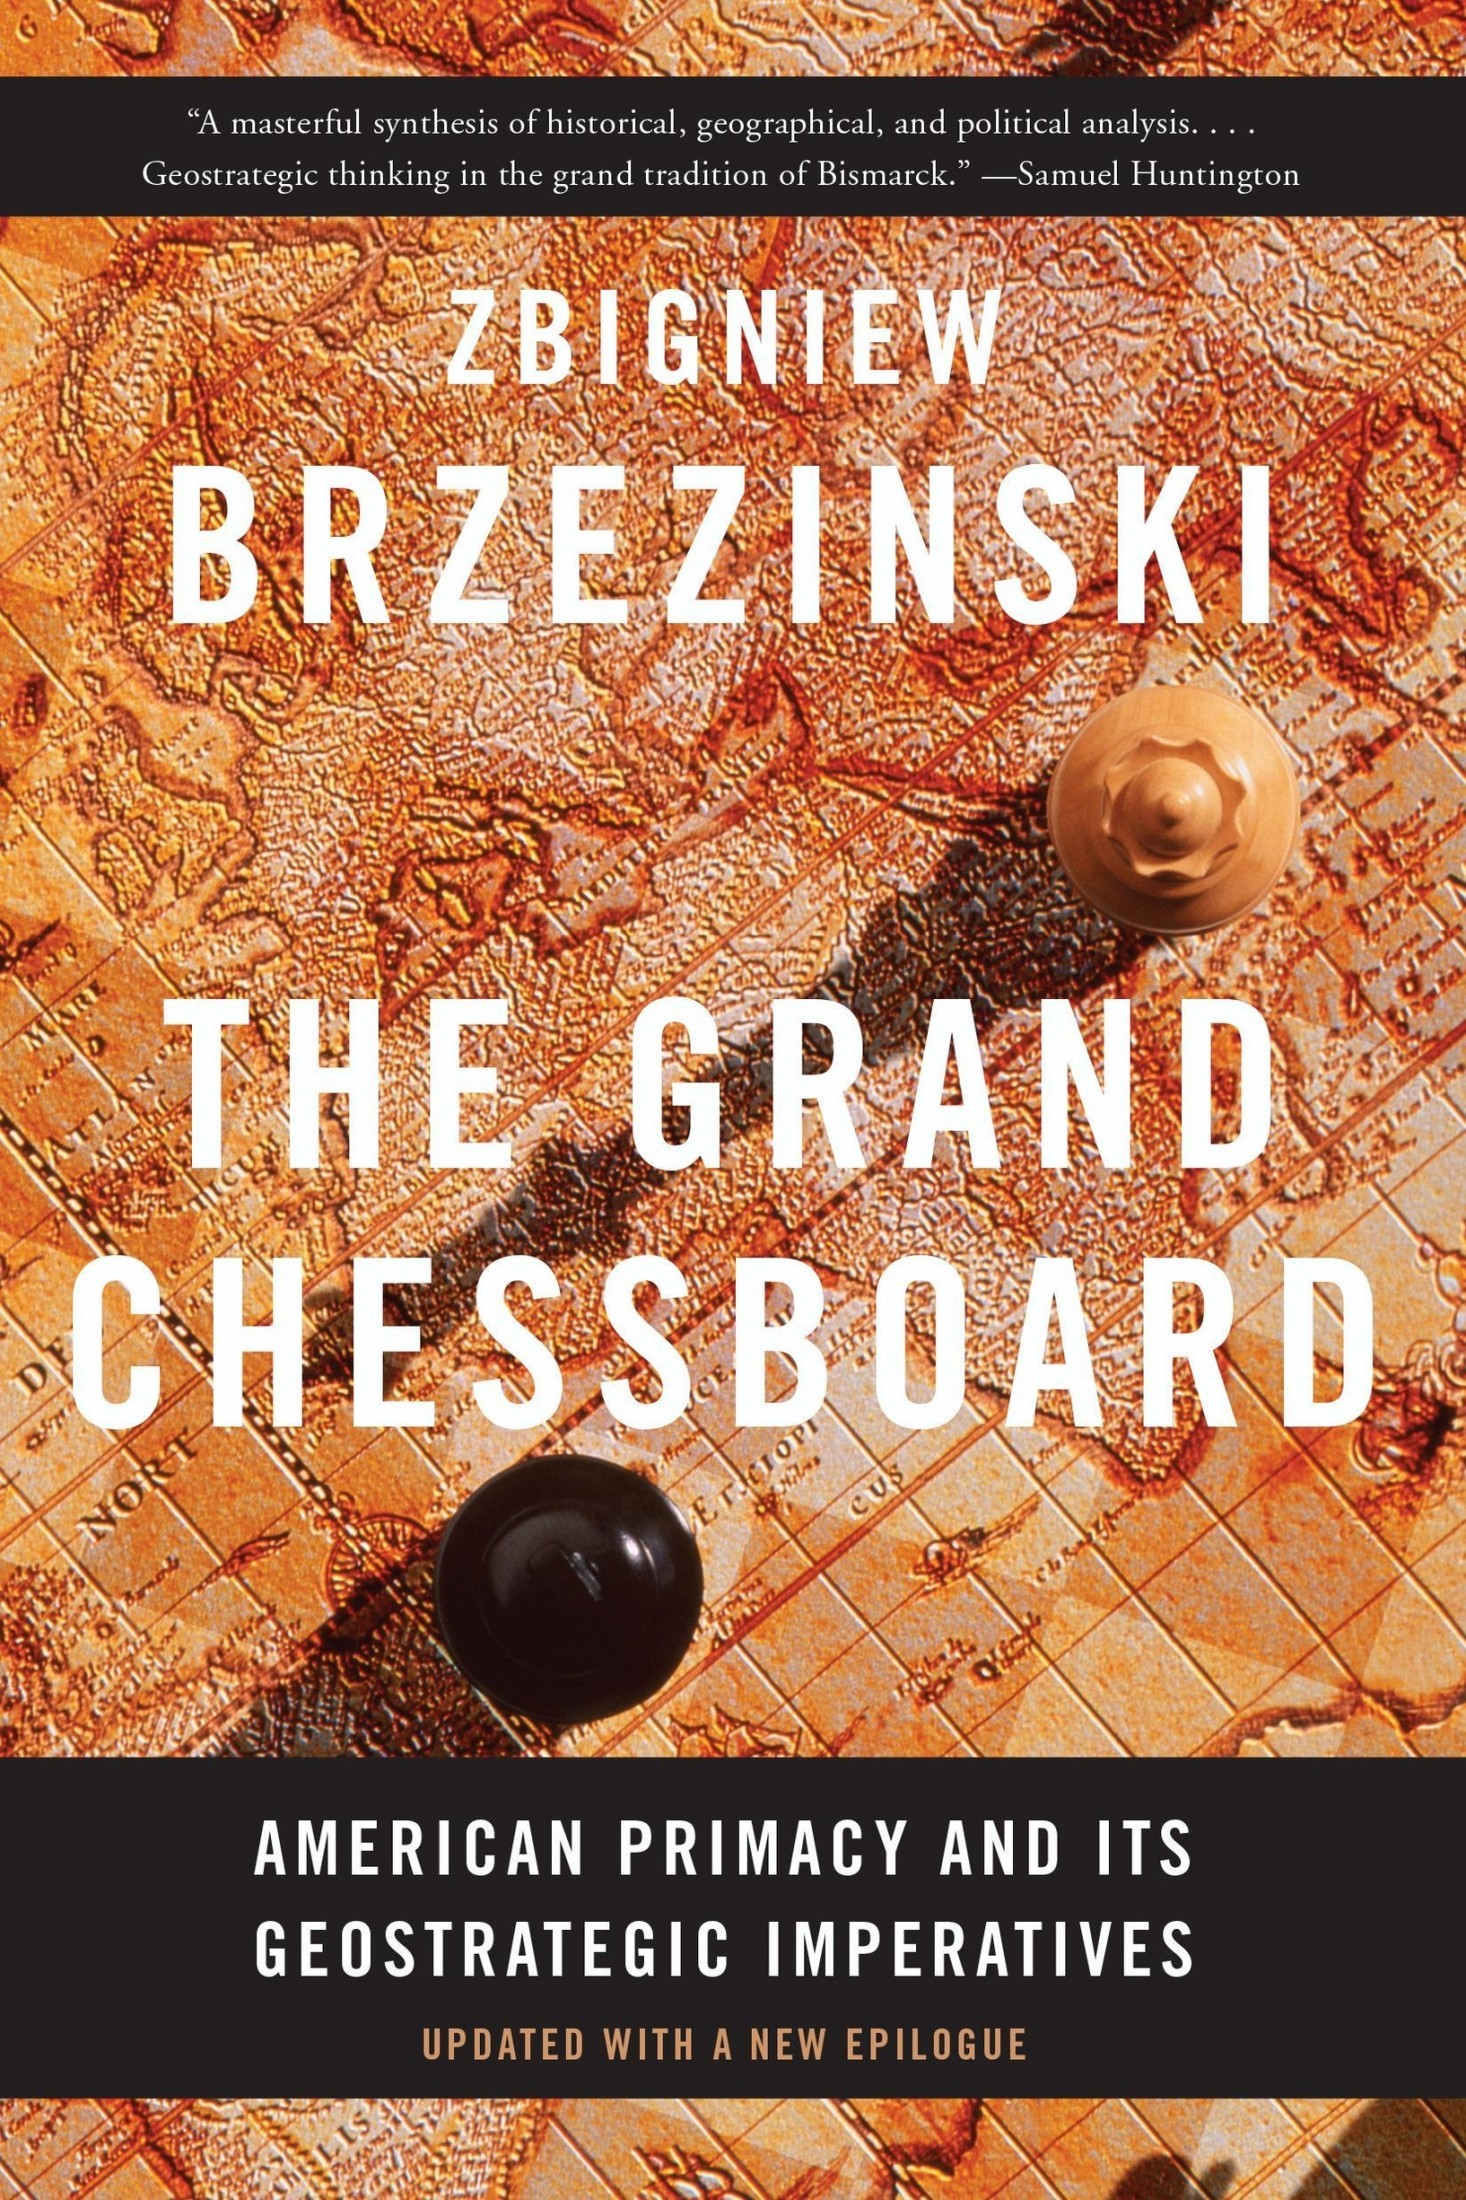 The Grand Chessboard: American Primacy and Its Geostrategic Imperatives